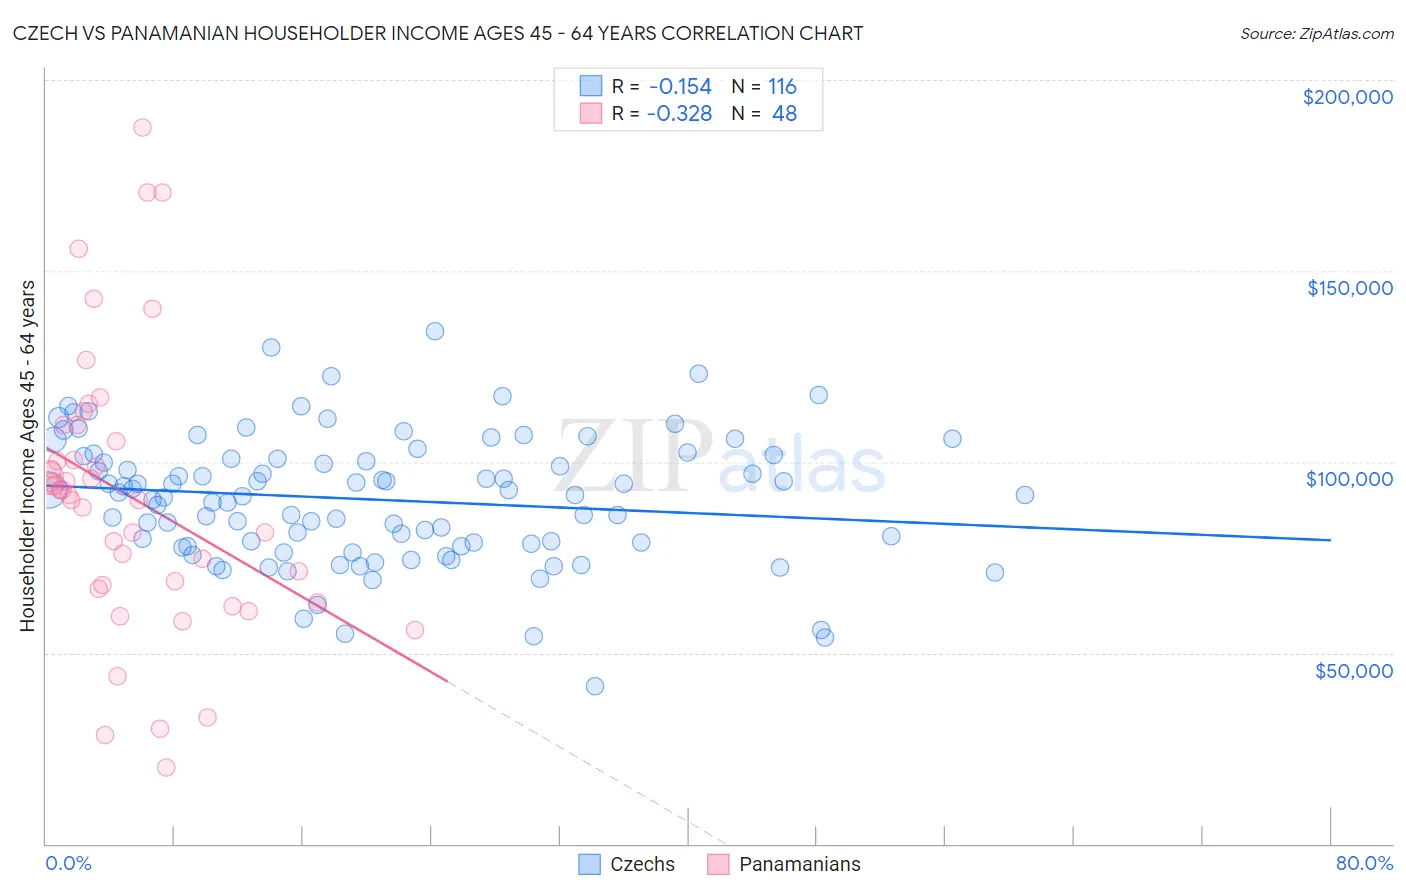 Czech vs Panamanian Householder Income Ages 45 - 64 years